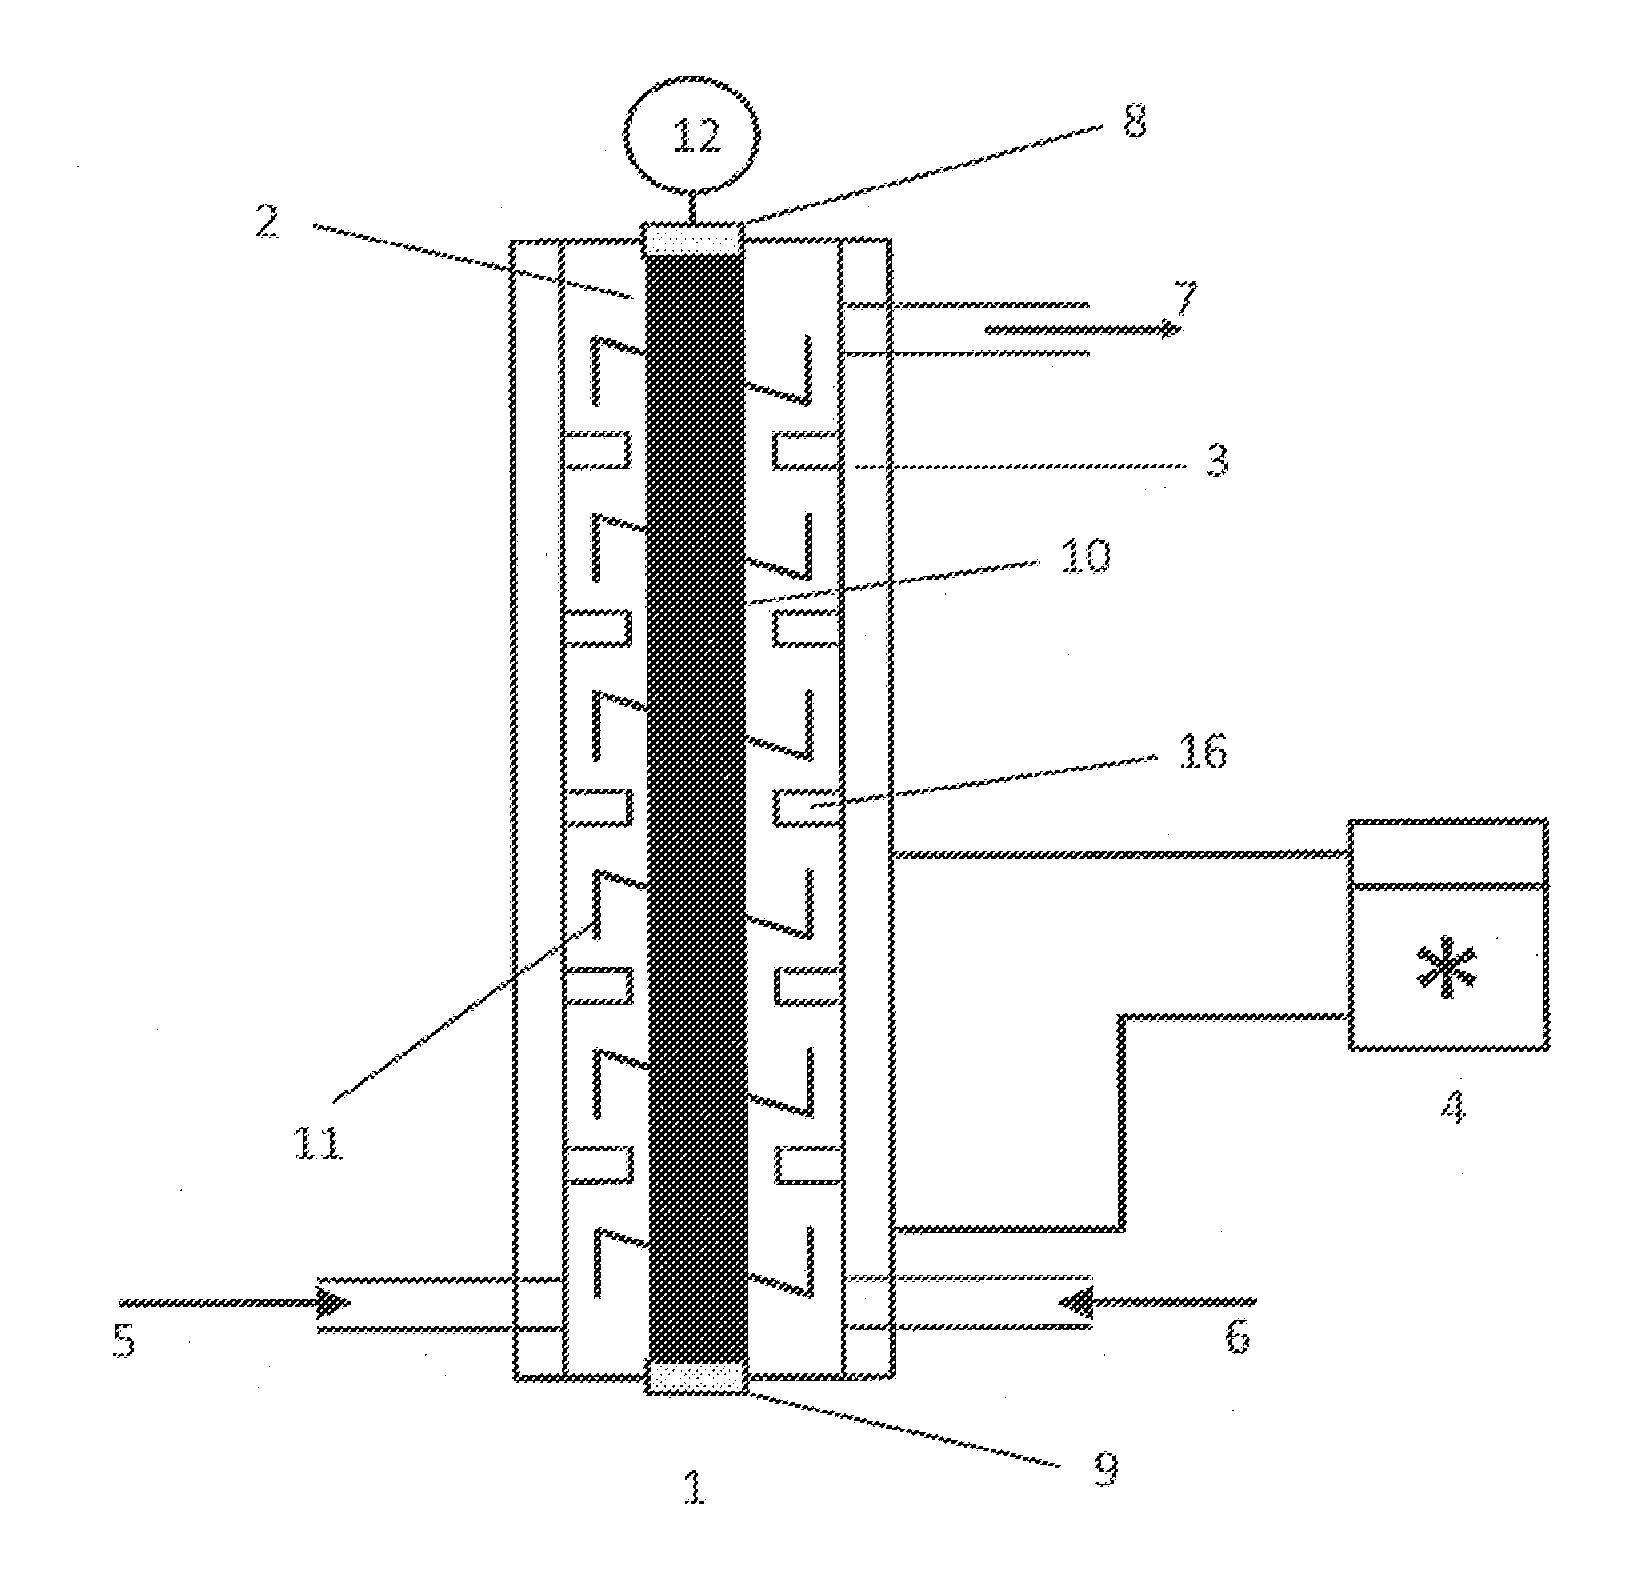 Emulsification device for continuously producing emulsions and/or dispersions